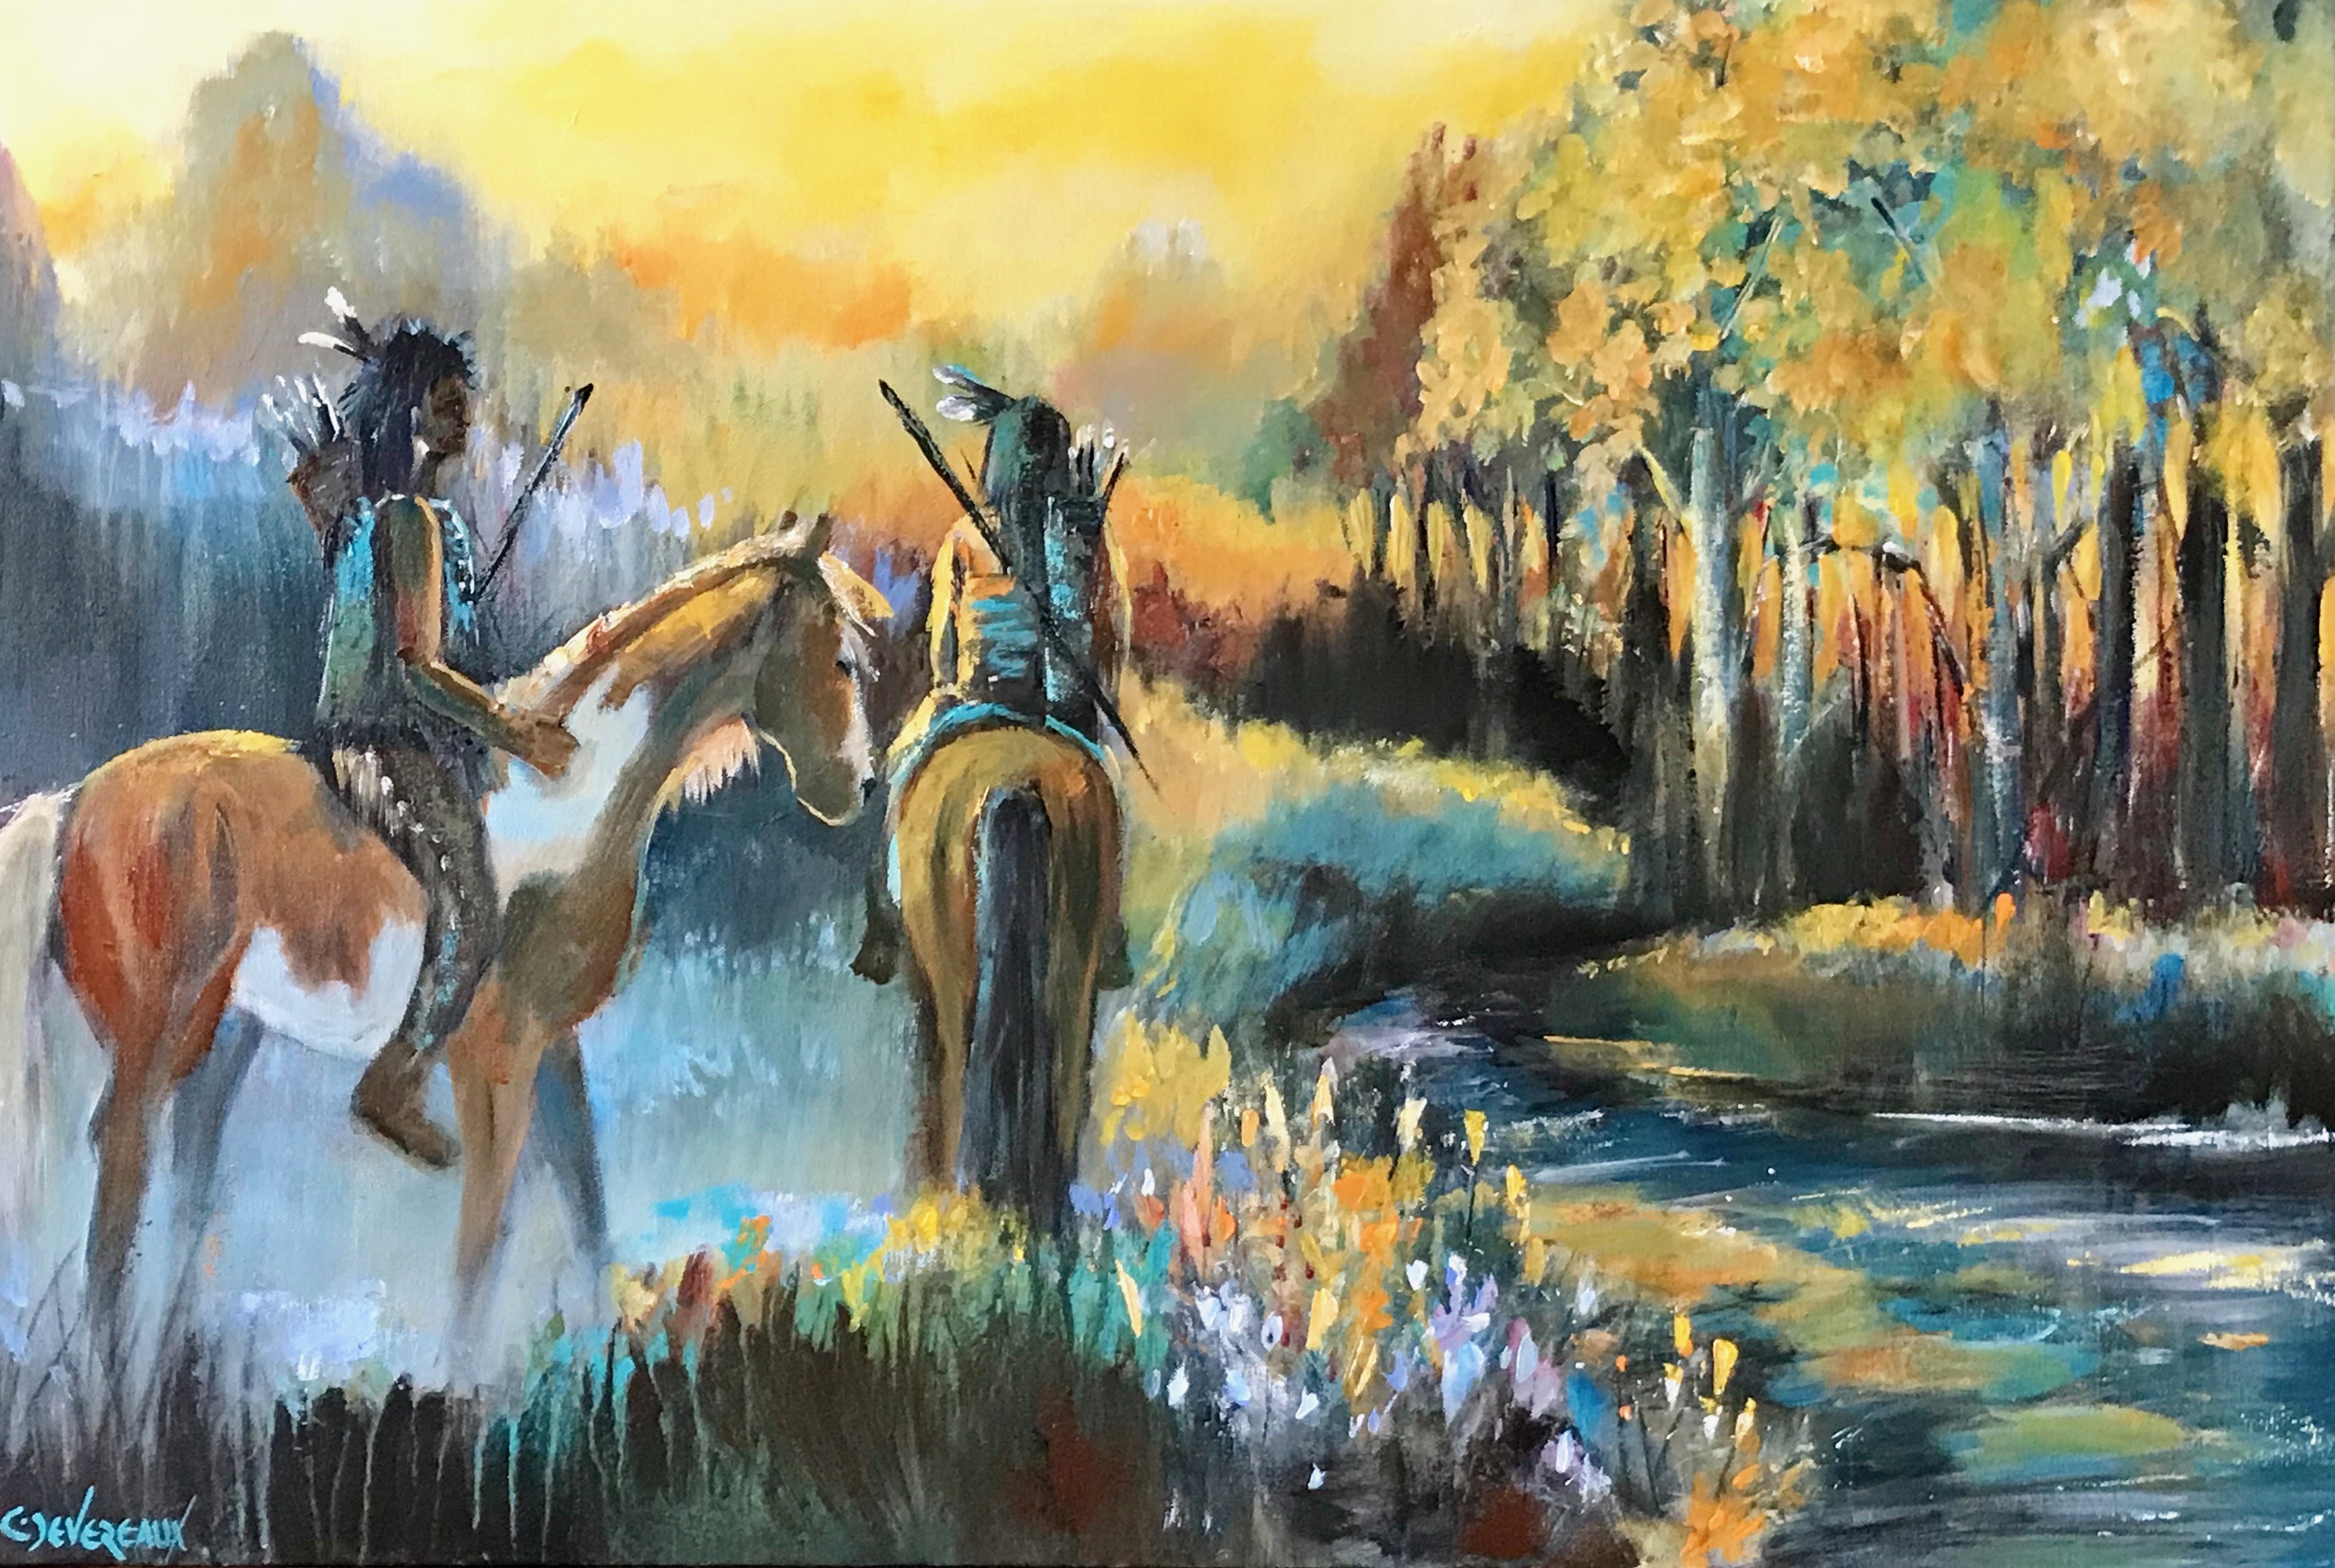 'Yellow Sky' 24x36 Contemporary Native American Horse Painting by Cher Devereaux on stretched canvas